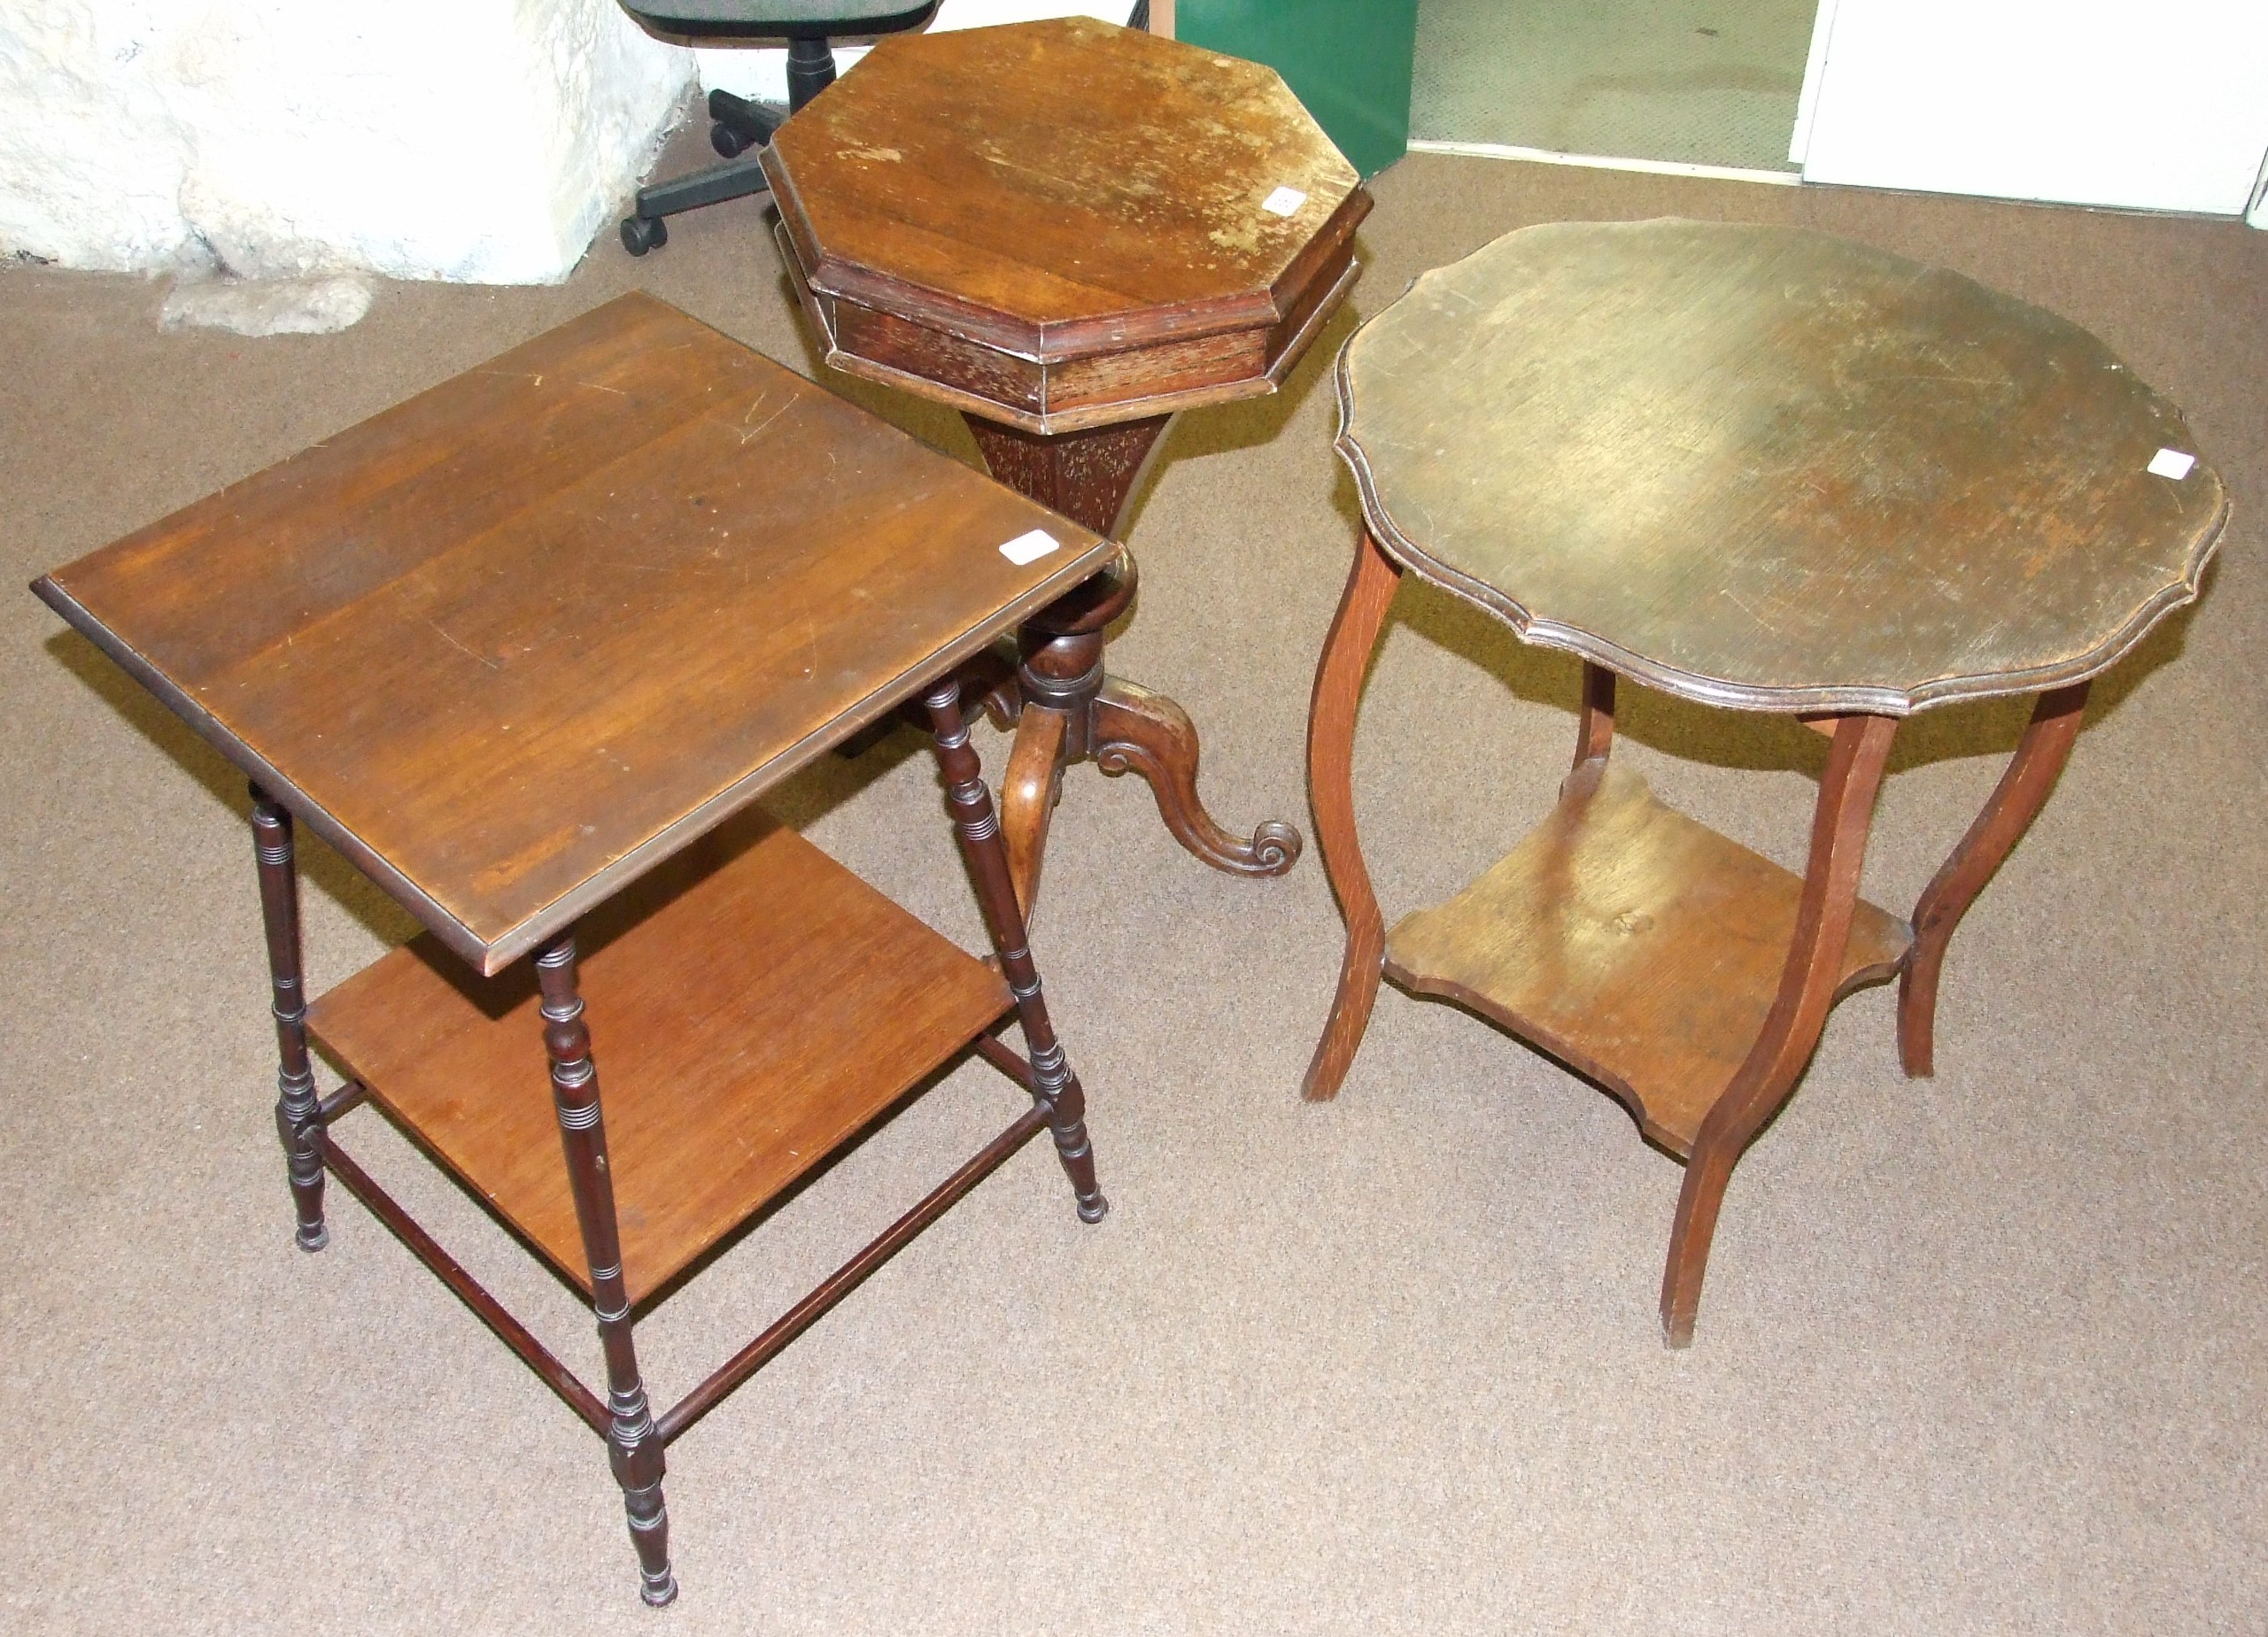 2 Edwardian Occasional Tables and Victorian Octagonal Rosewood Sewing Table